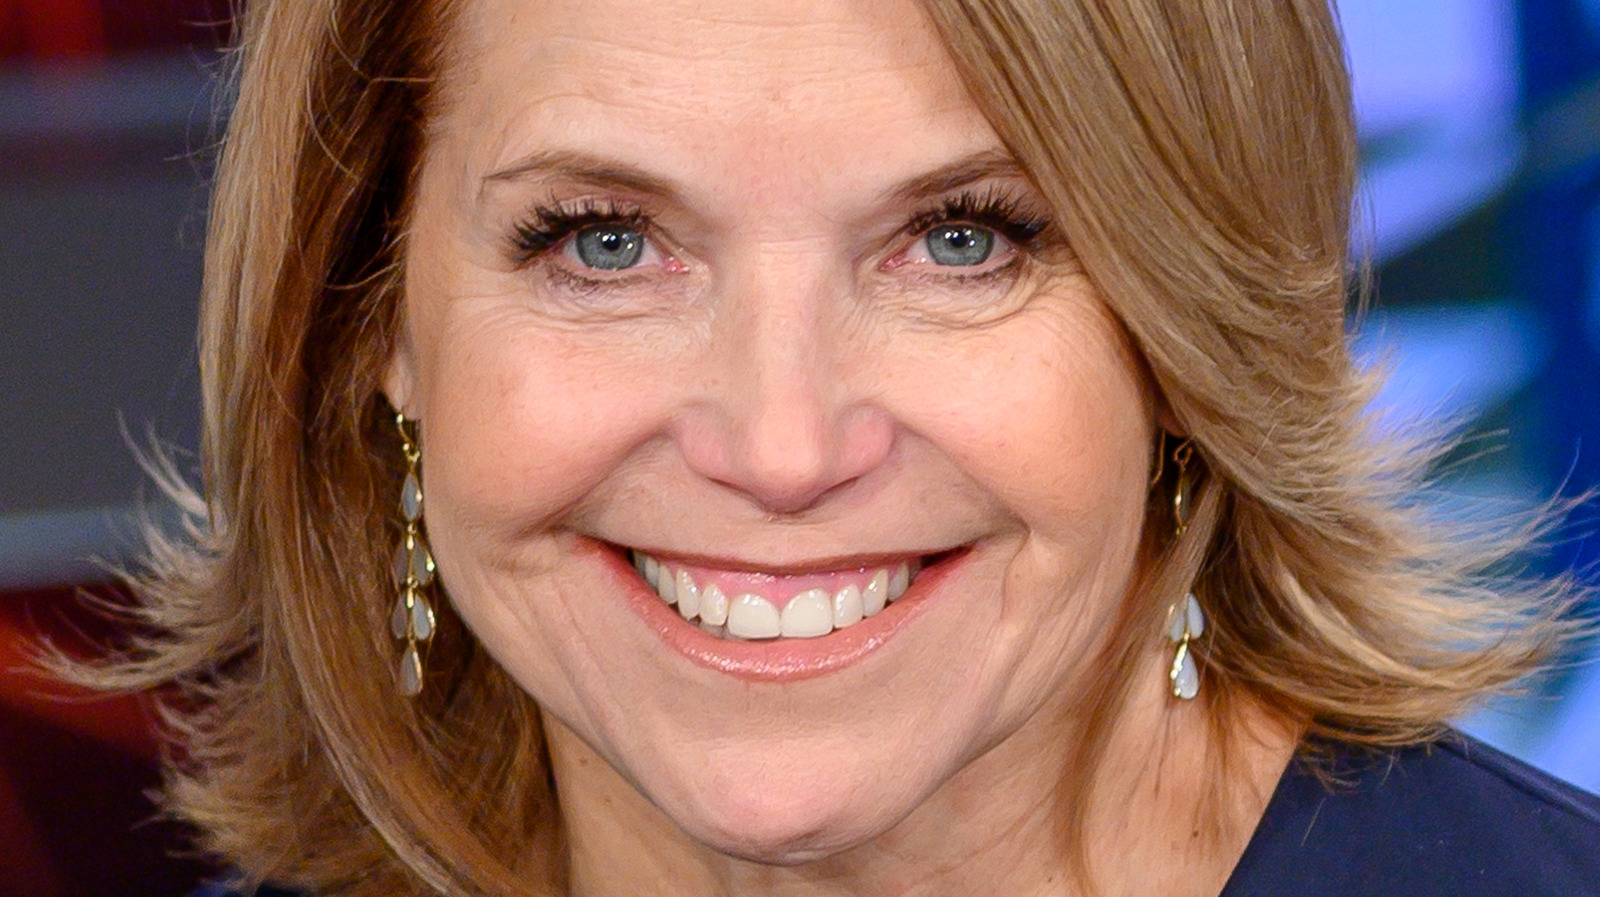 Who did Katie Couric secretly fall in love with?